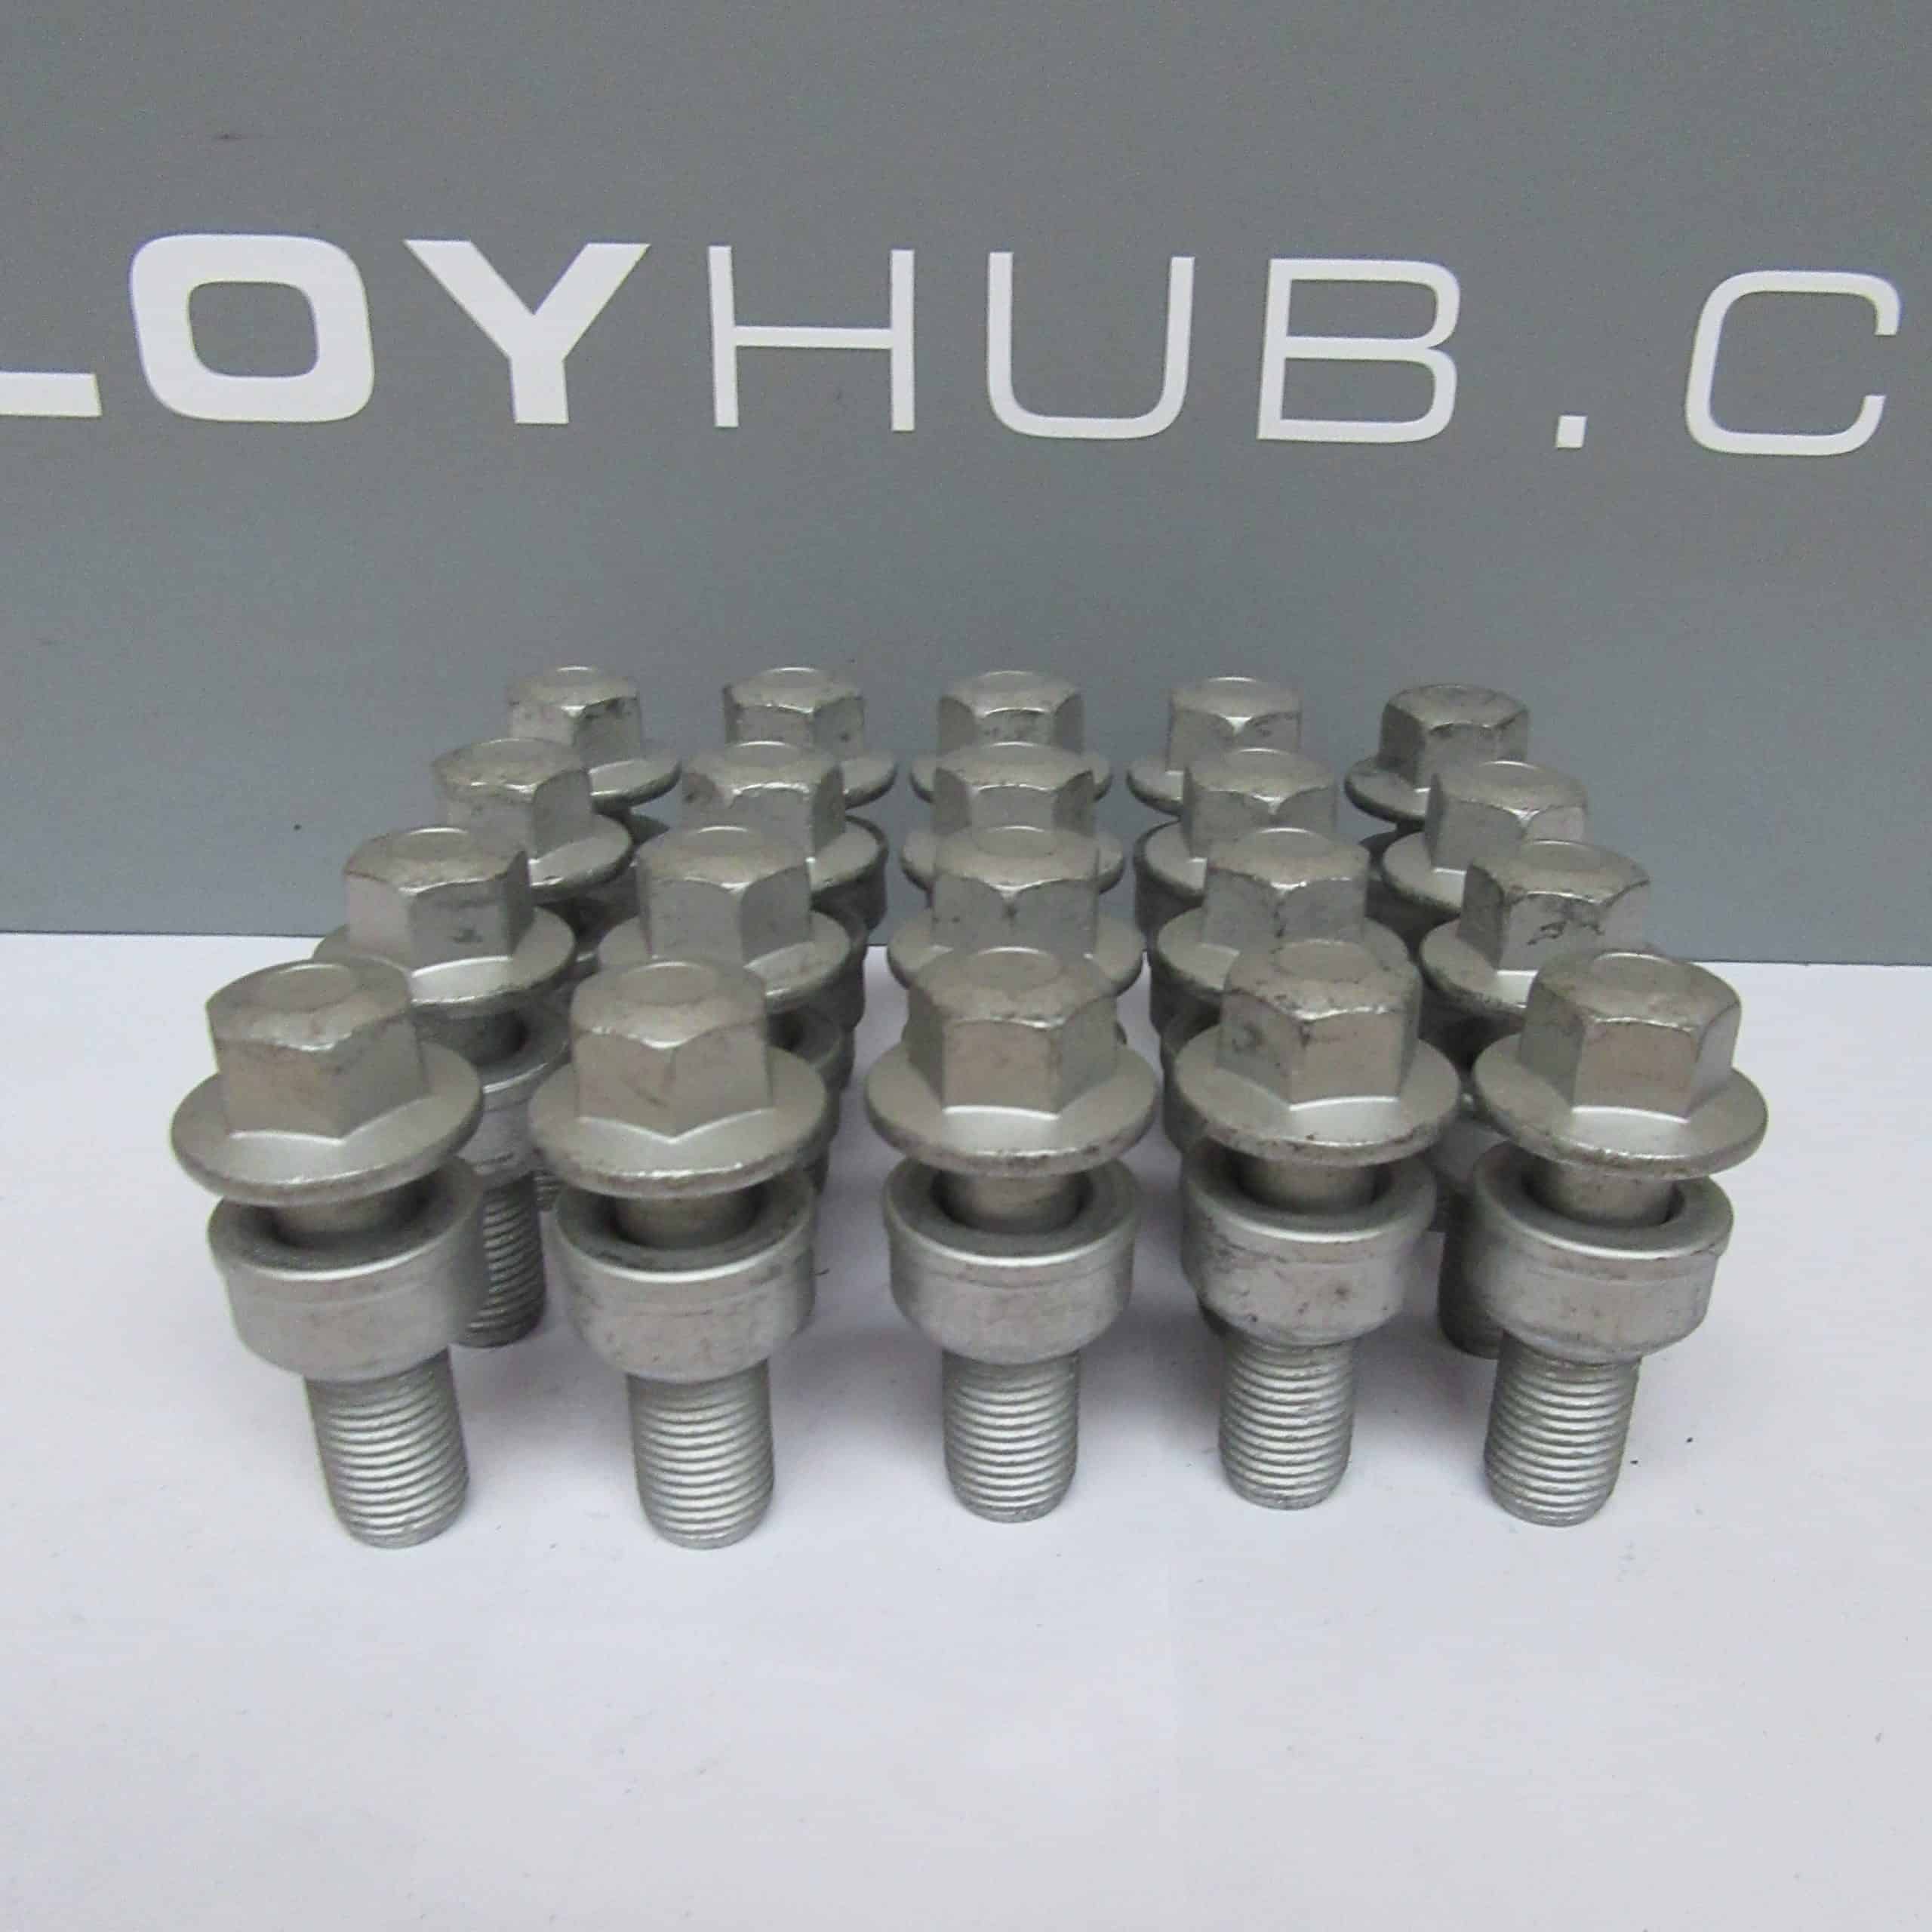 Wheel Bolts 8U 2011 to 2015 14x1.5 Nuts Tapered for Audi Q3 20 